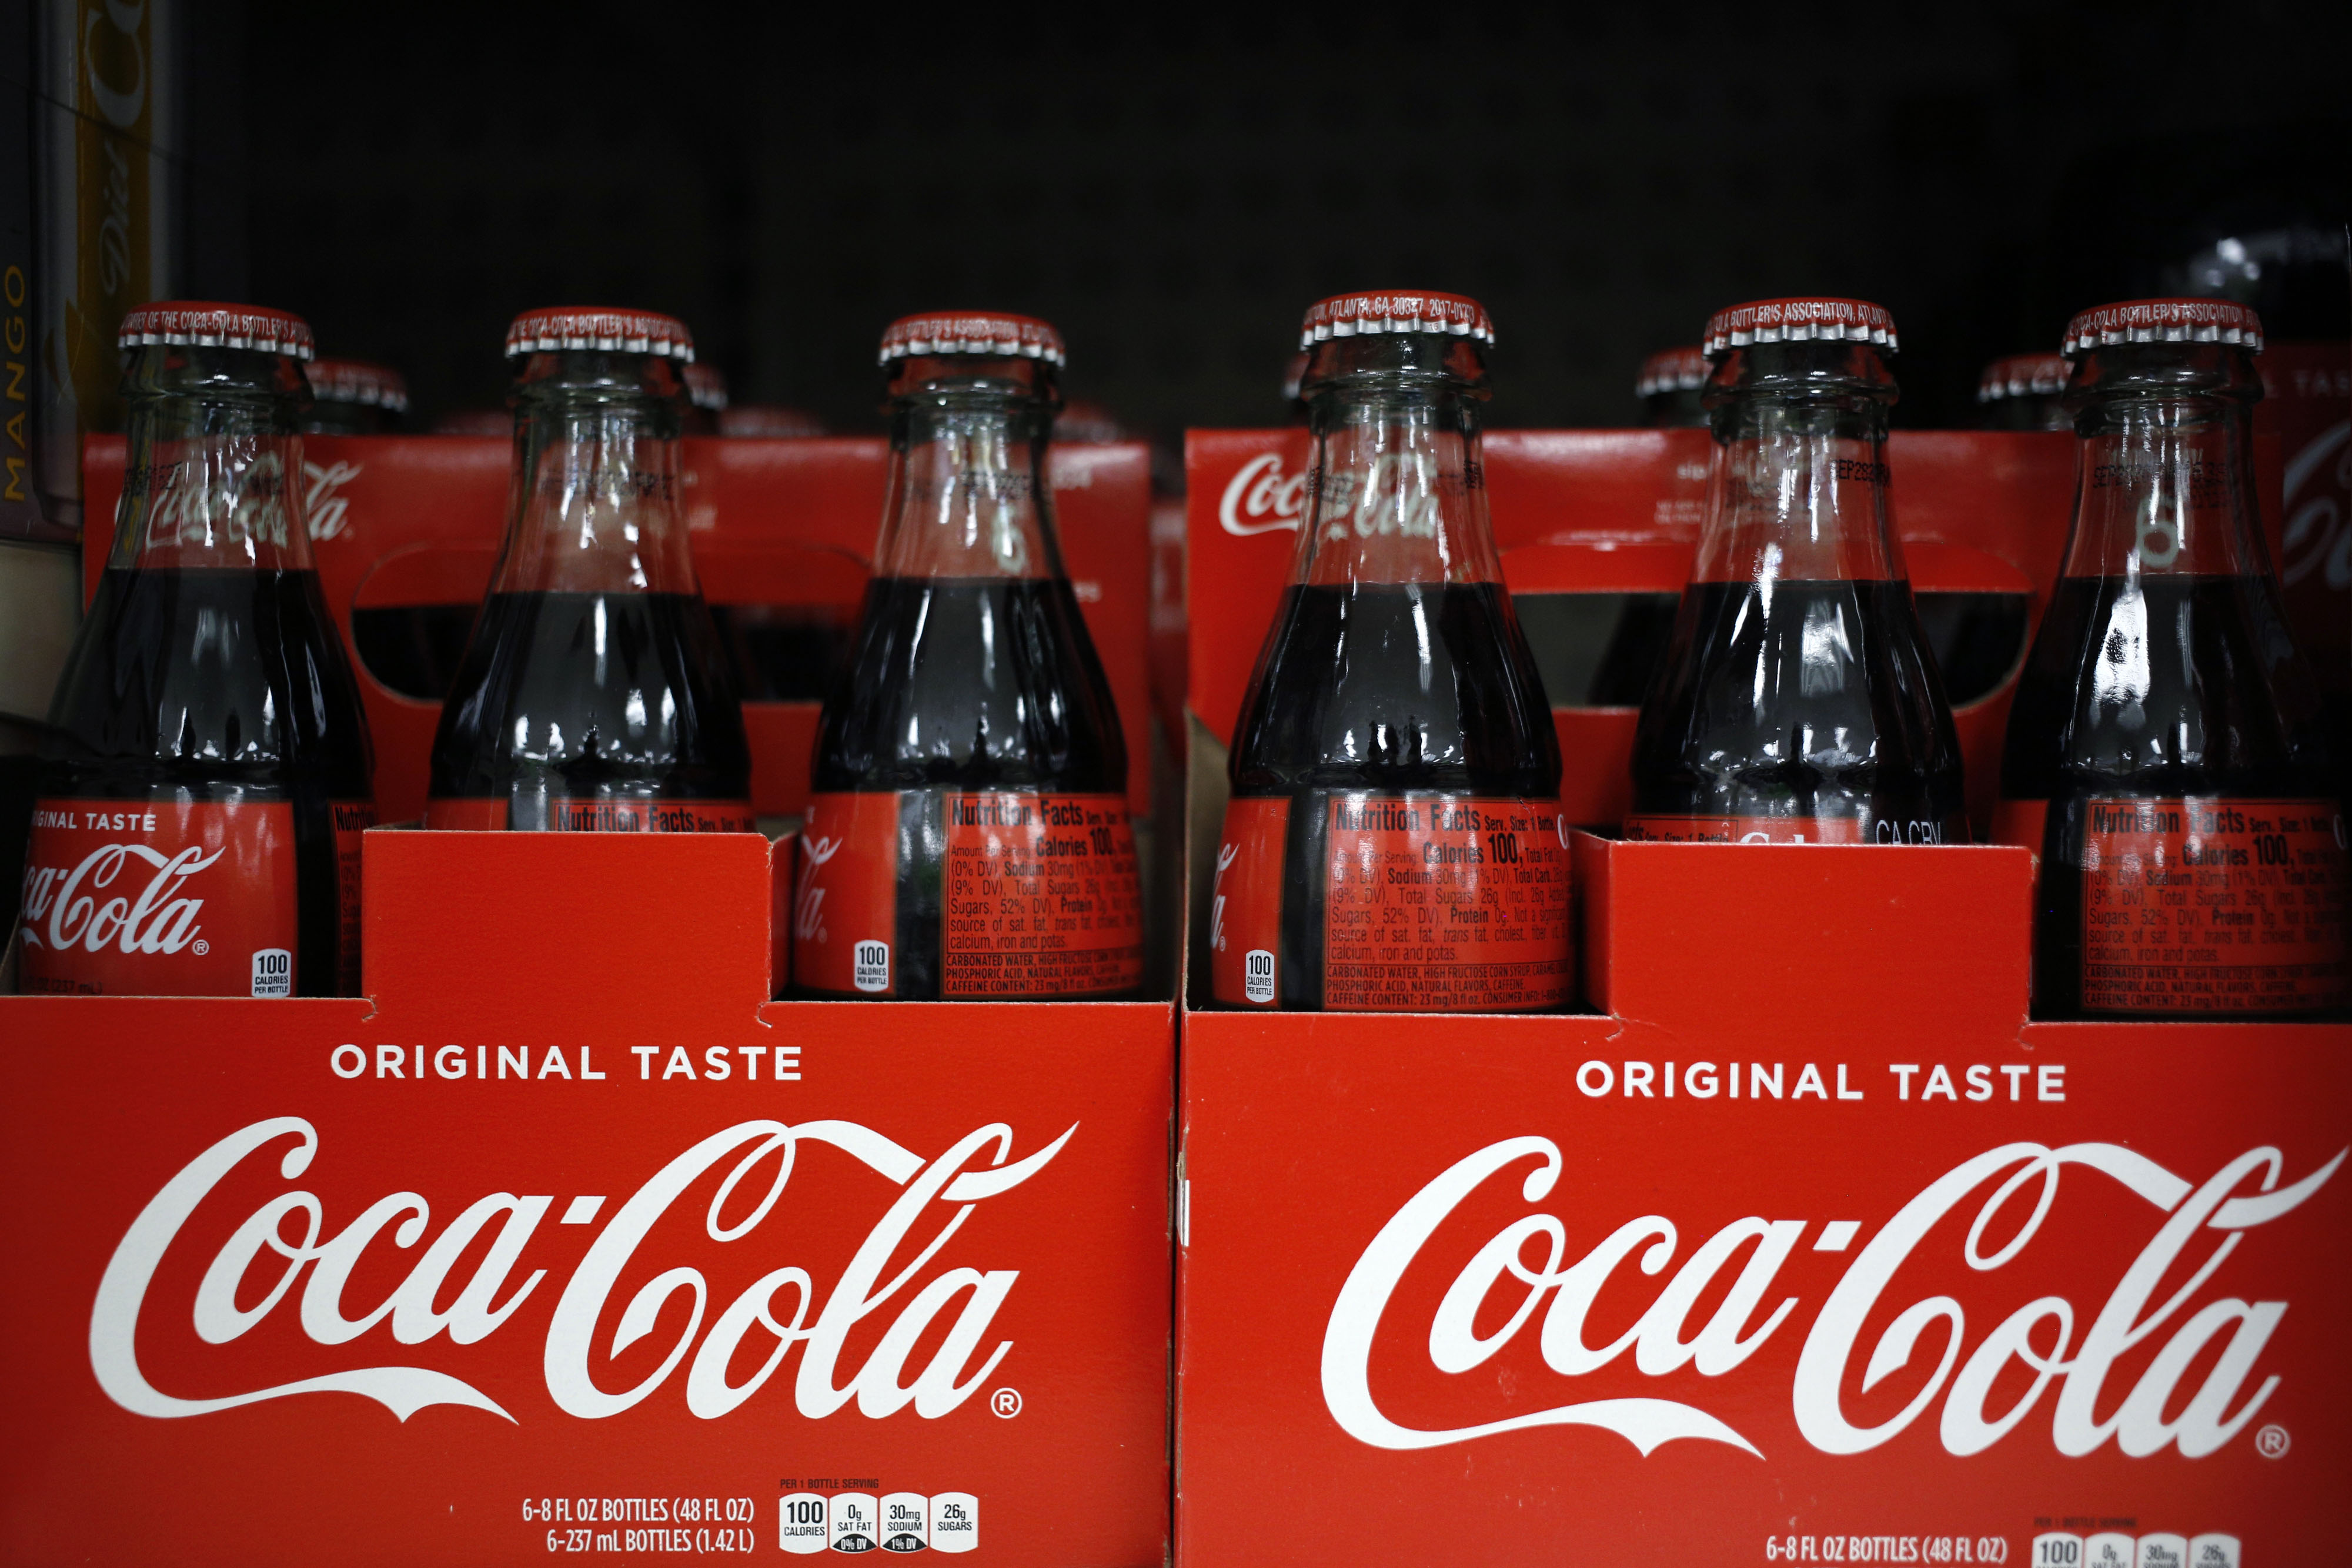 Bottles of Coca-Cola are on sale at a store in Louisville, Kentucky, on February 10.